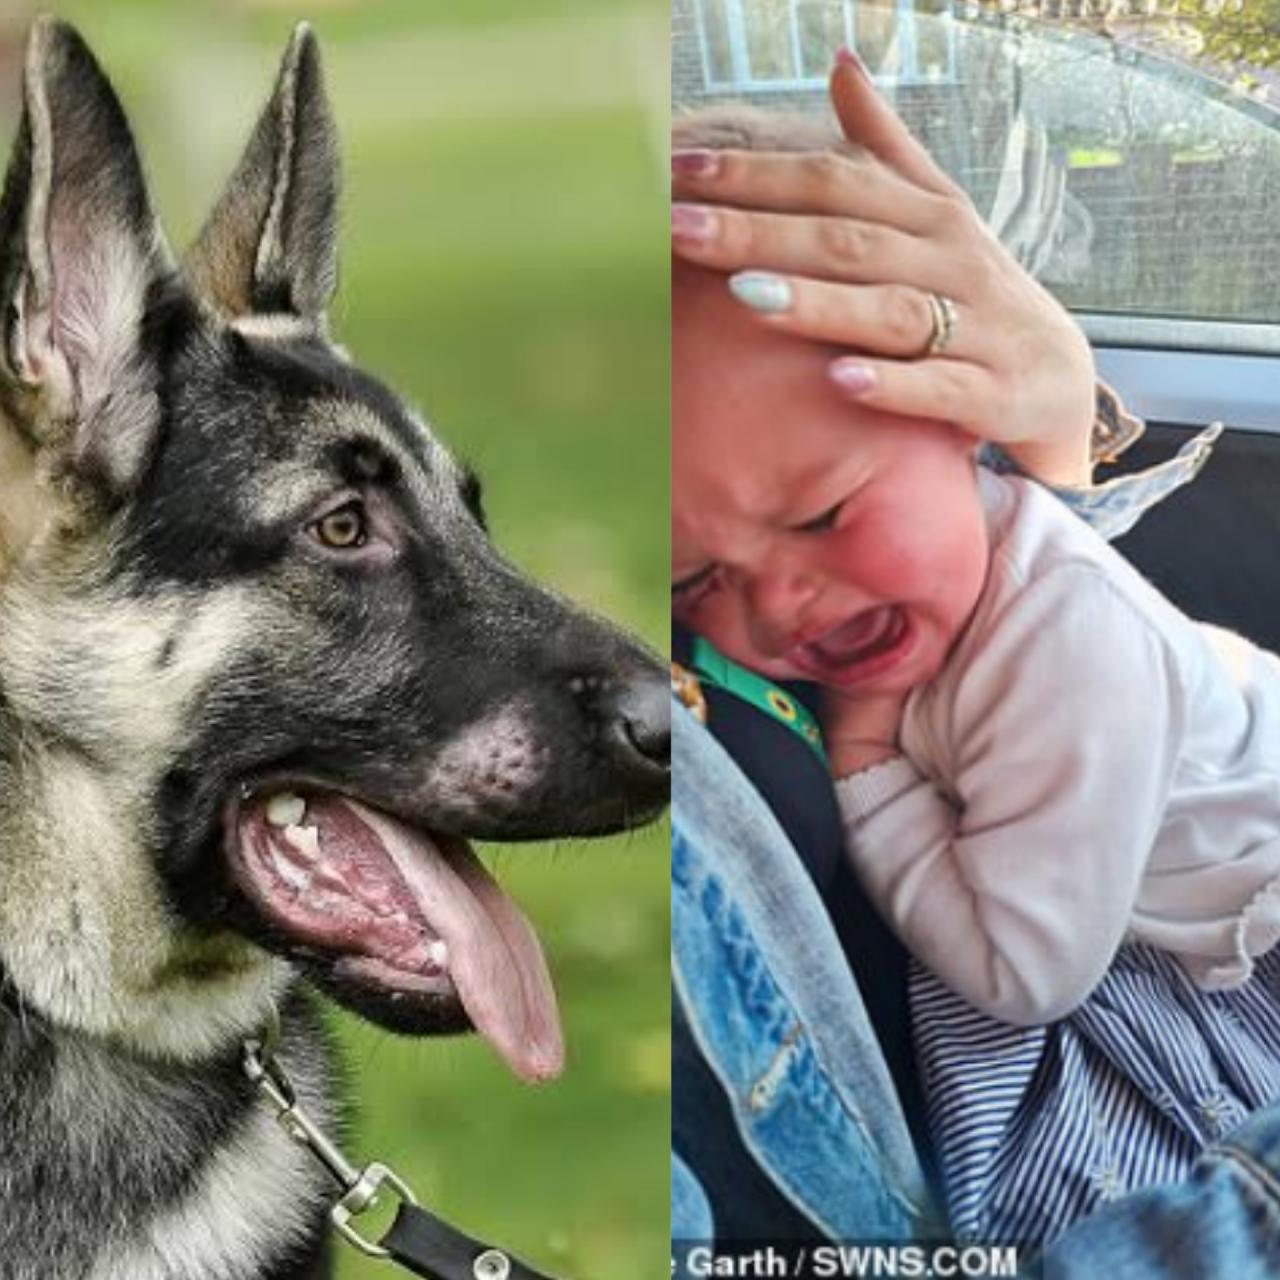 Dog bites 18-month-old baby in the face, missing her eye by fraction of an inch in unprovoked attack